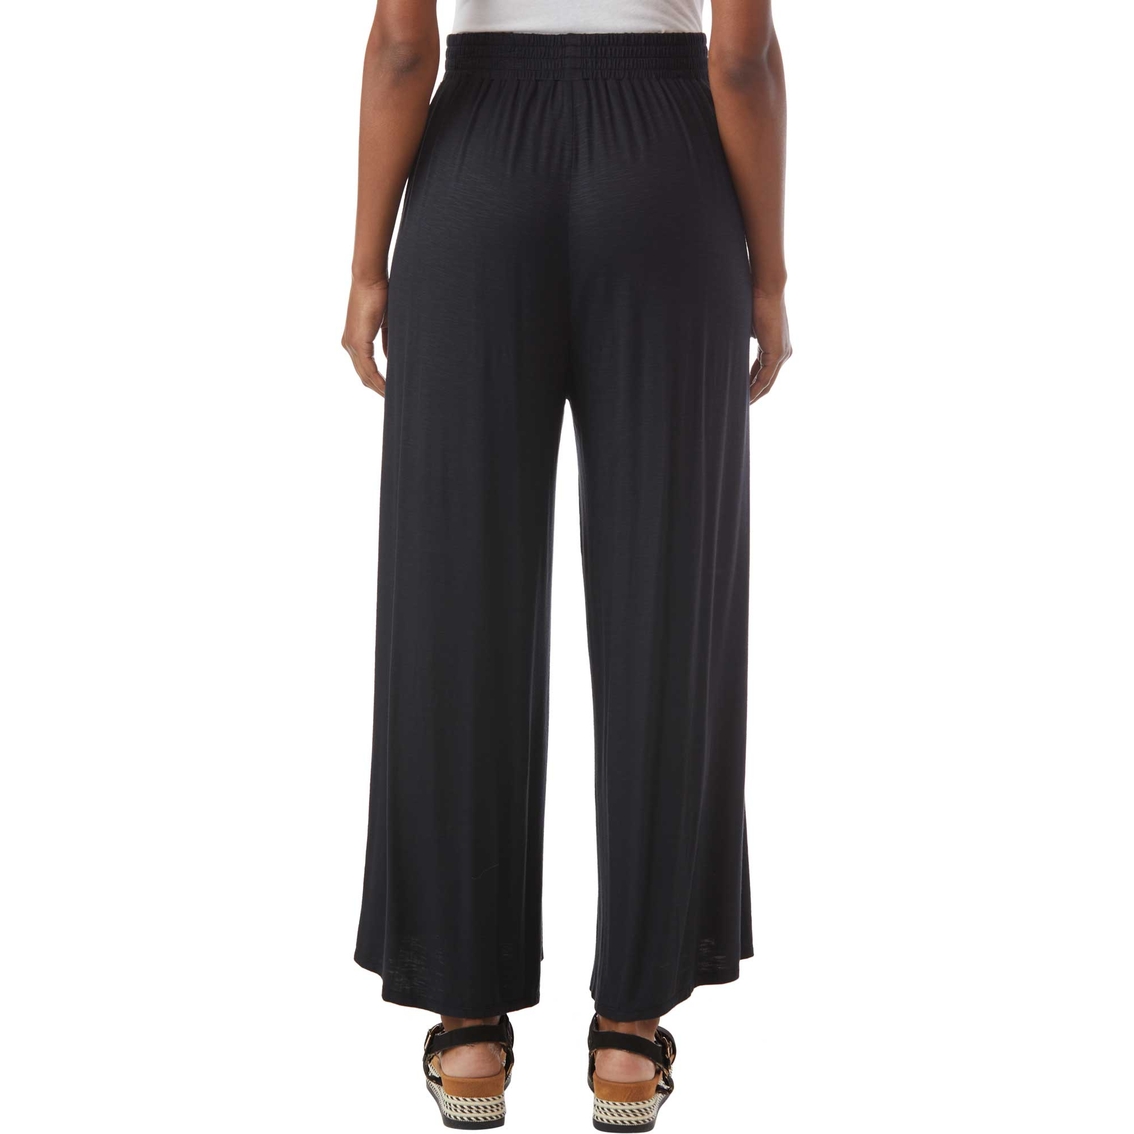 Jw Knit Palazzo Pants | Pants | Clothing & Accessories | Shop The Exchange